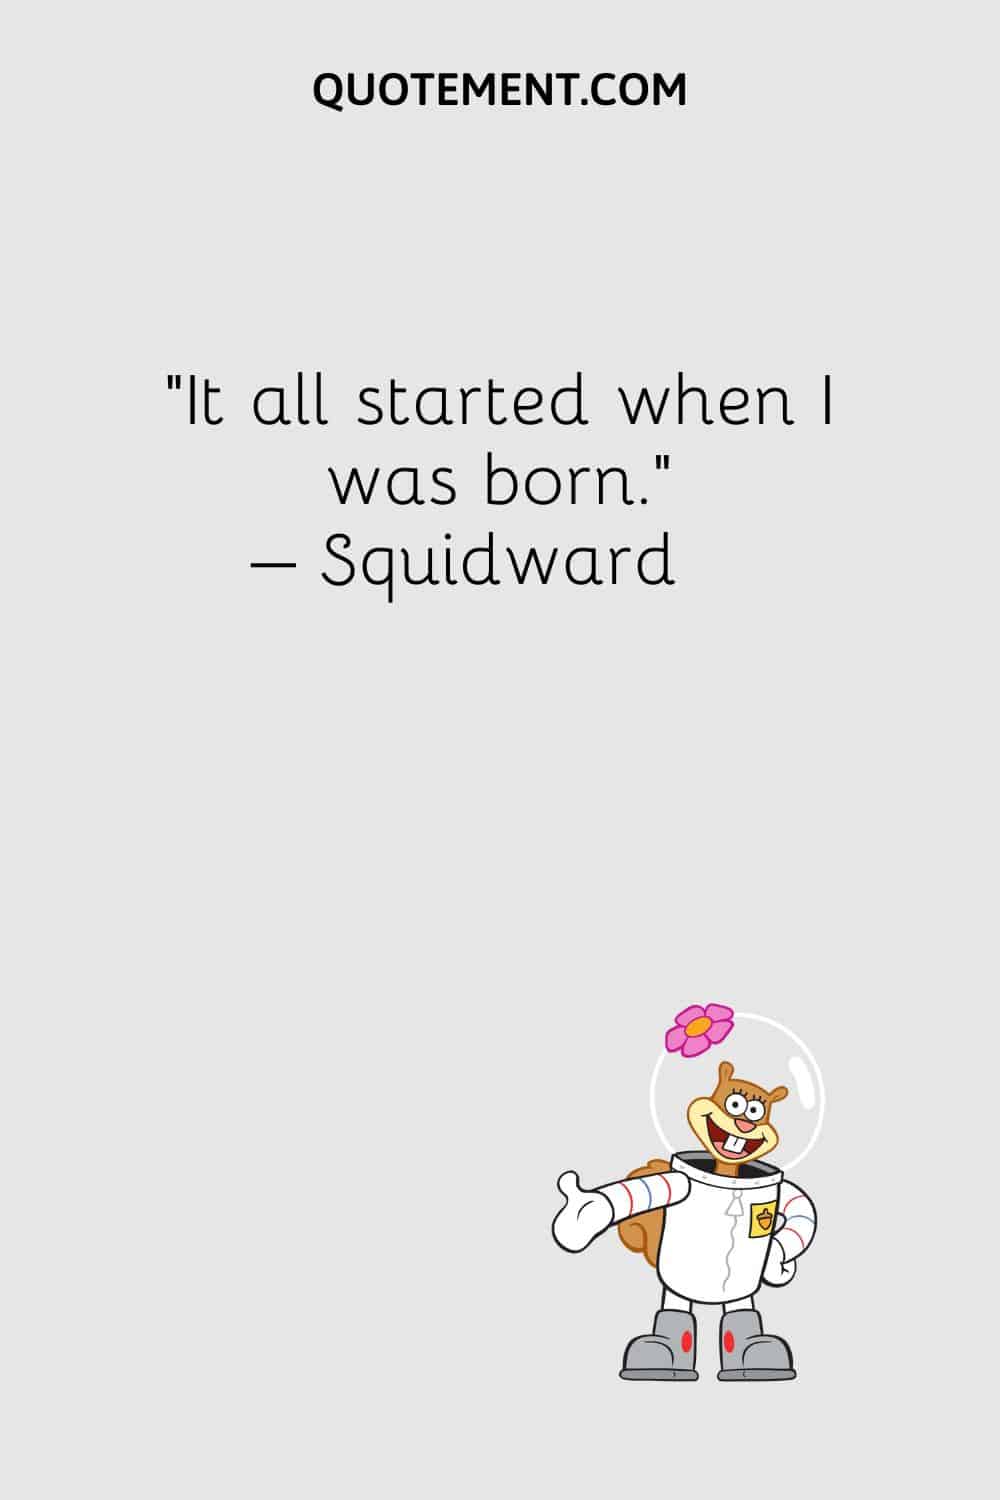 “It all started when I was born.” – Squidward